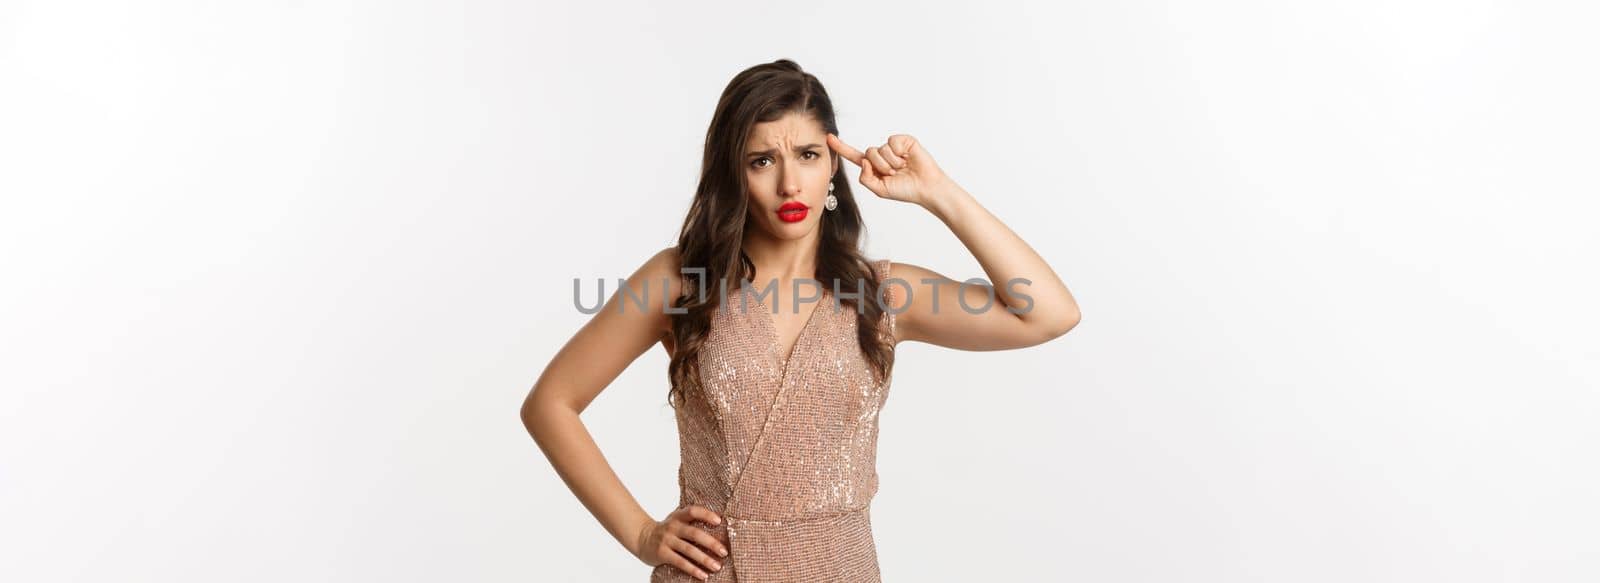 Concept of casino, celebration and party. Woman looking with disdain and roll finger on head, scolding someone, are you stupid gesture, standing in dress over white background.